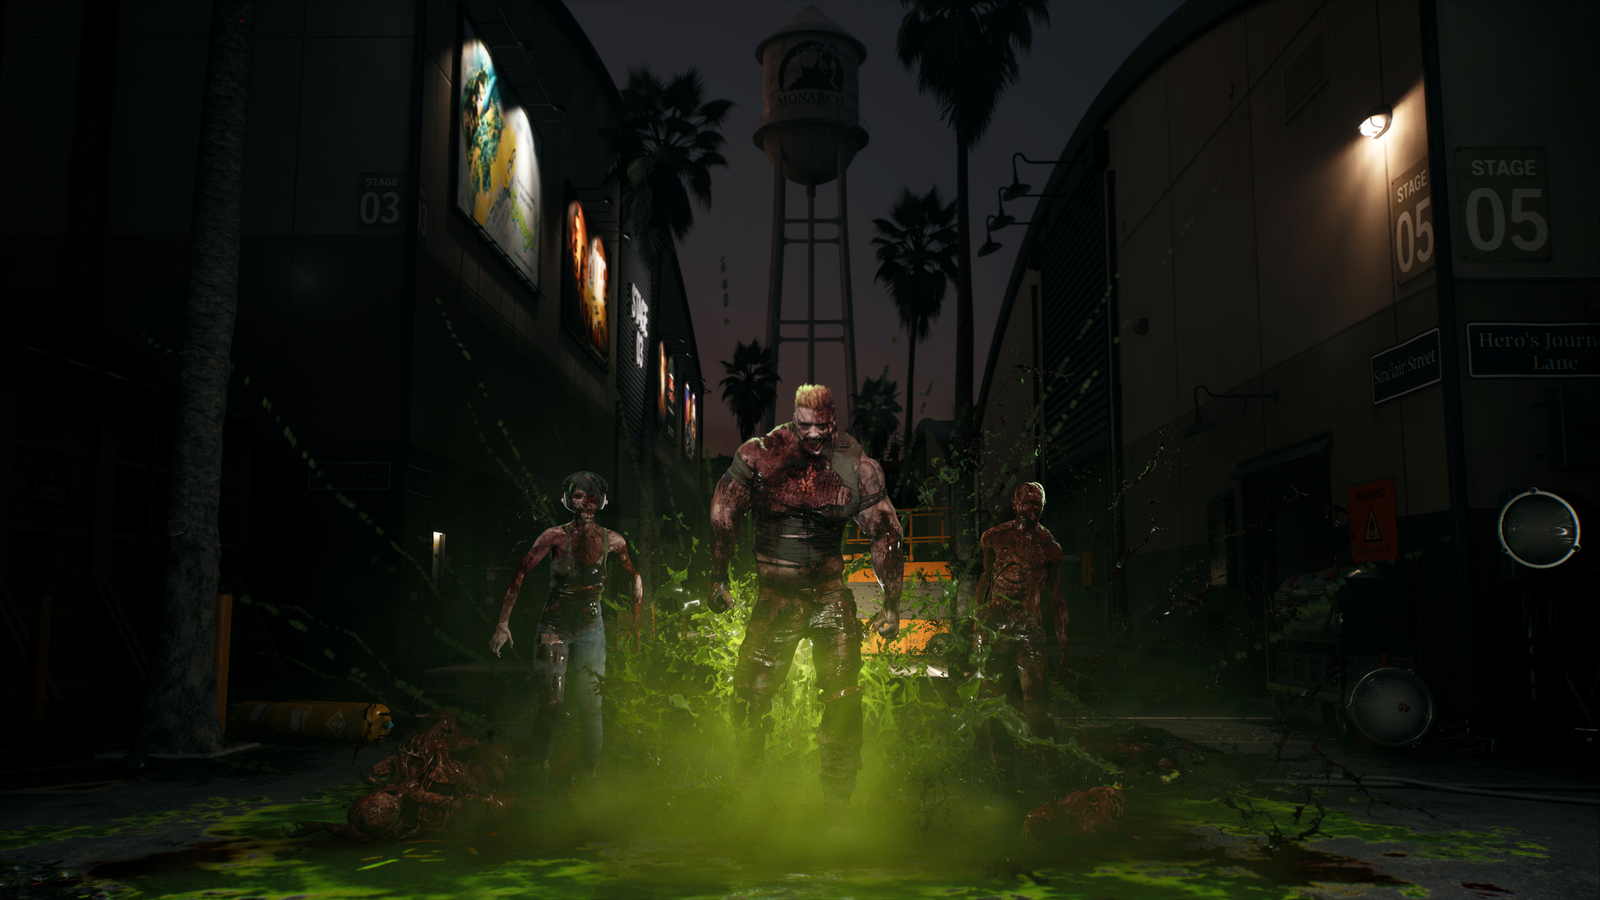 Dead Island 2 Review - Stuck in the Past — Too Much Gaming